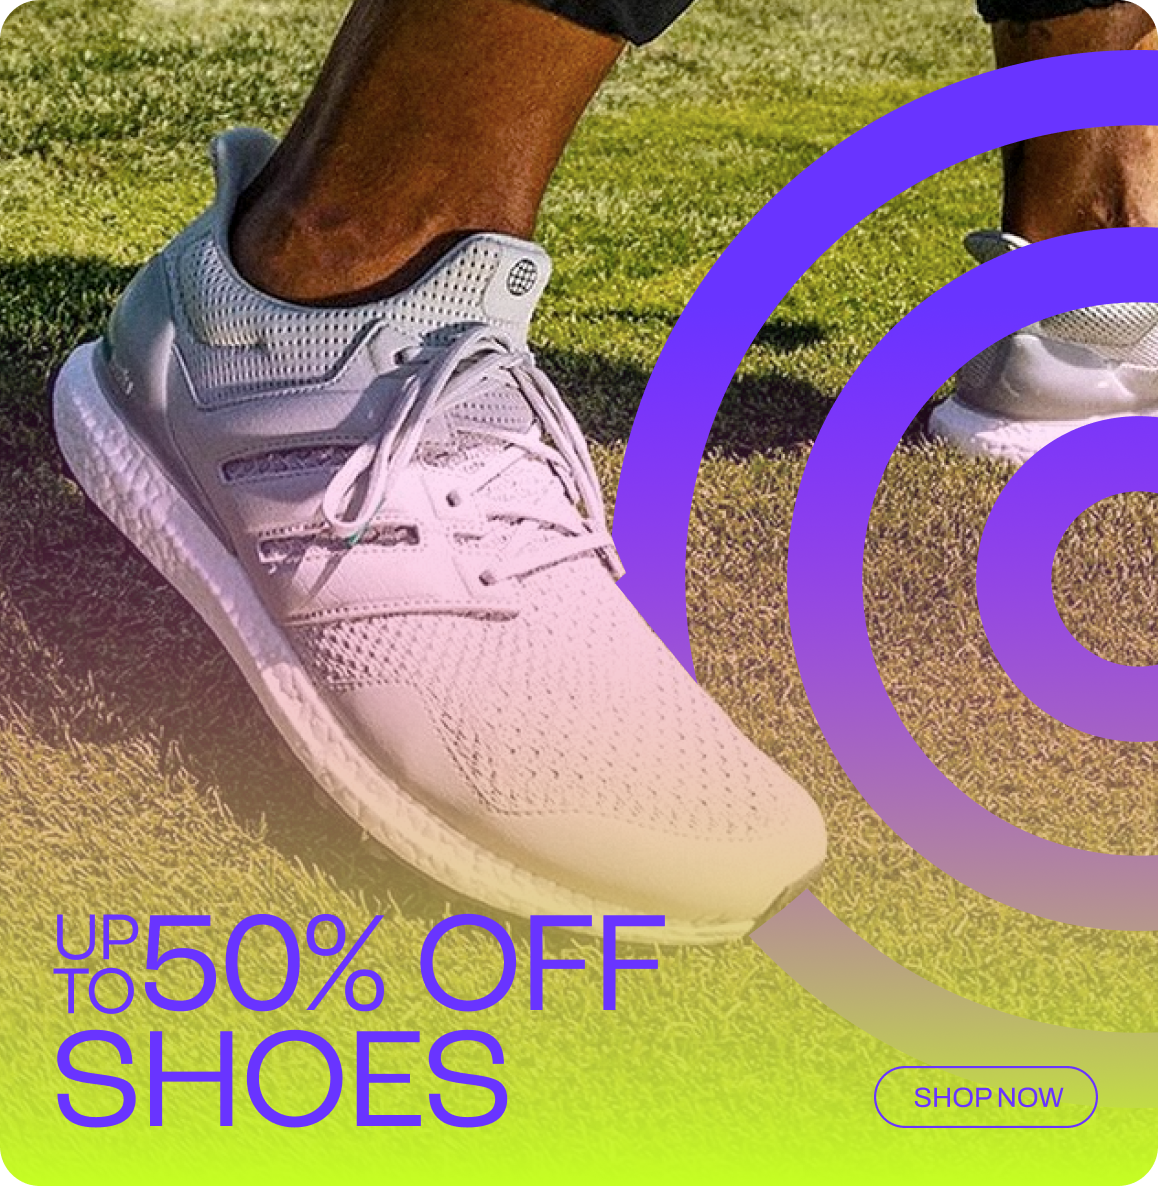 Up to 50% Off Shoes